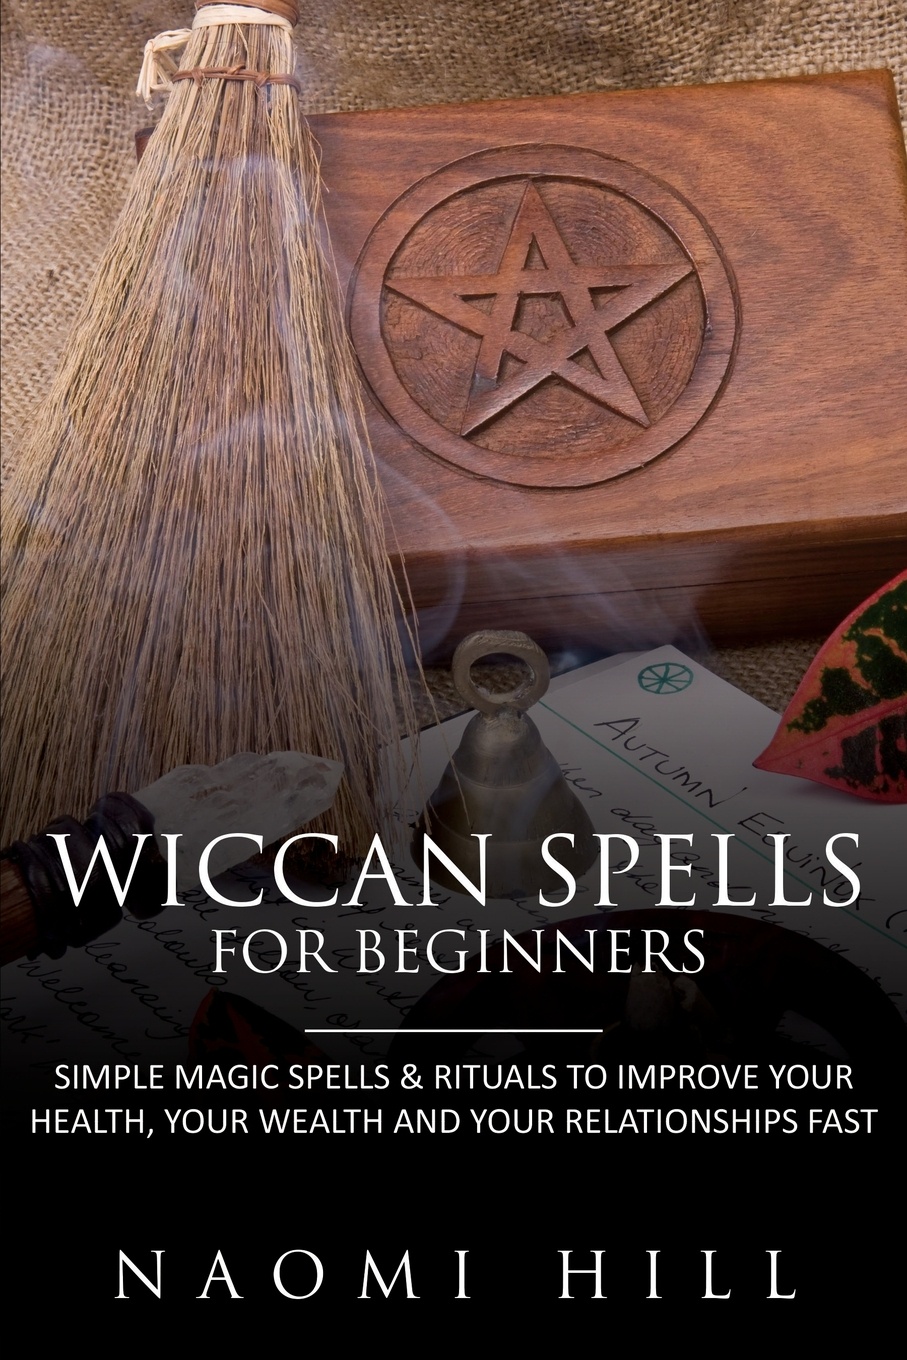 Wiccan Spells for Beginners. Simple Magic Spells & Rituals to Improve Your Health, Your Wealth and Your Relationships Fast